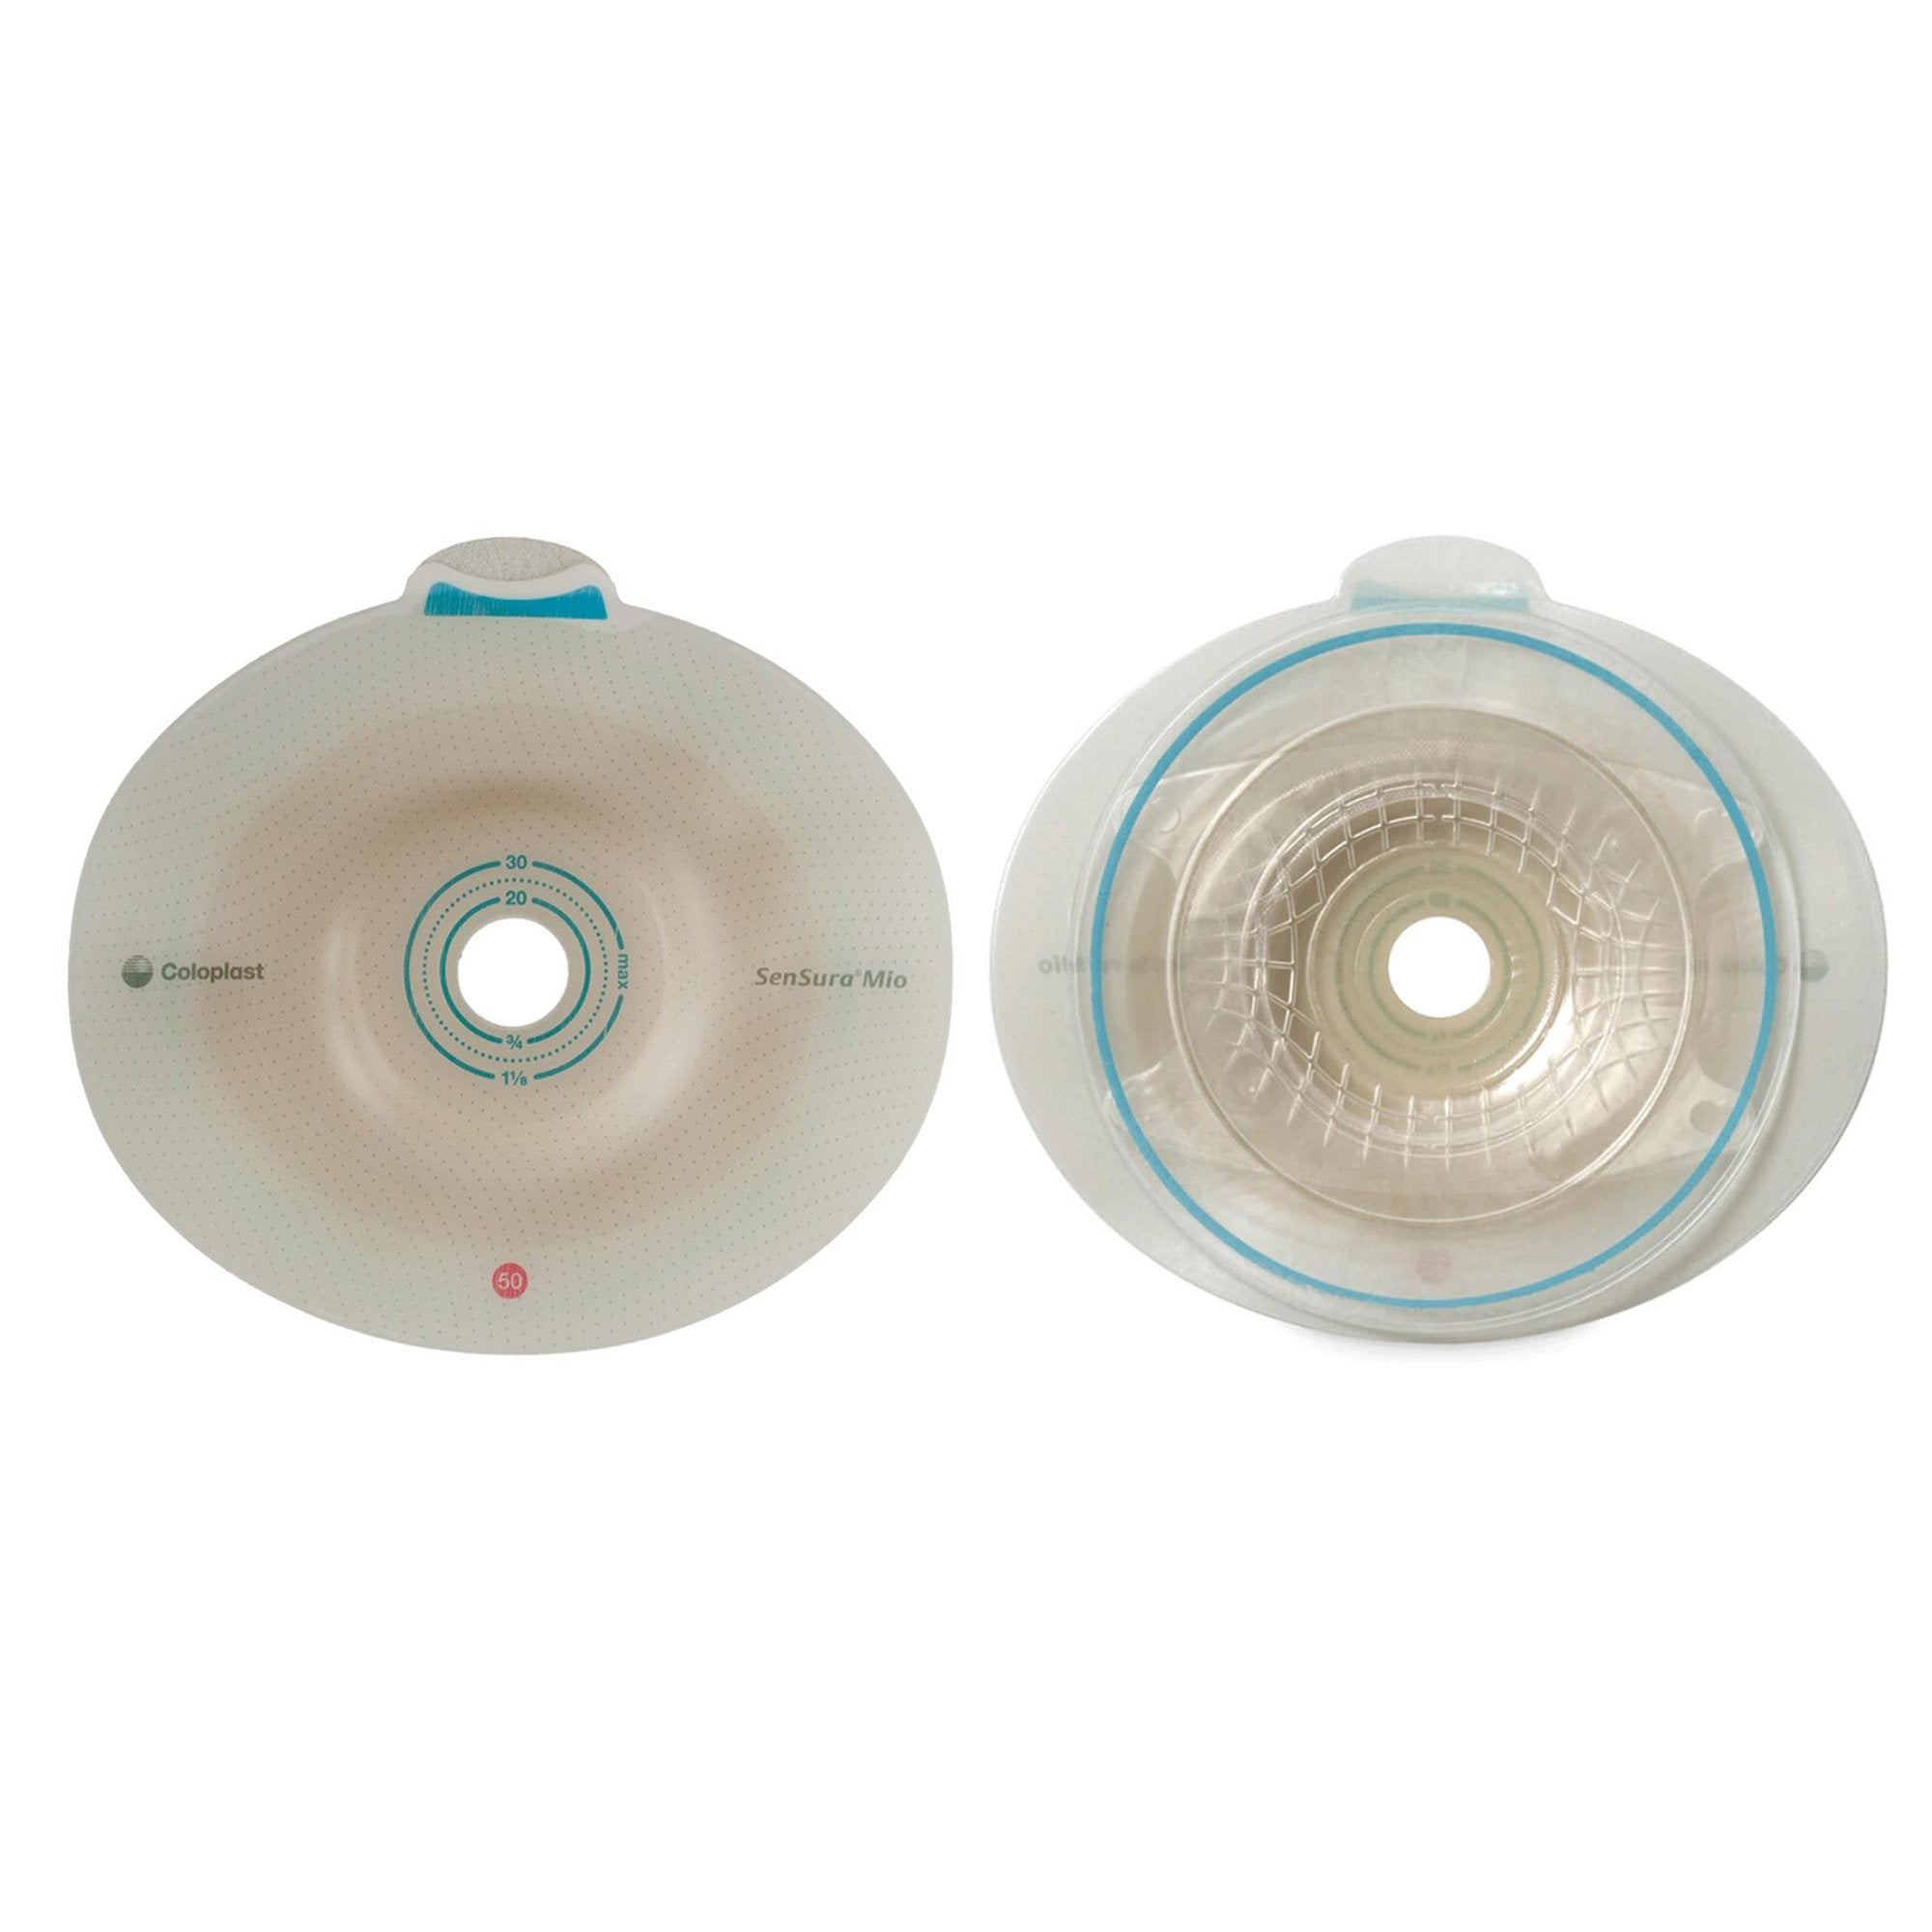 SenSura Mio Convex Skin Barrier With 15-40 mm Stoma Opening